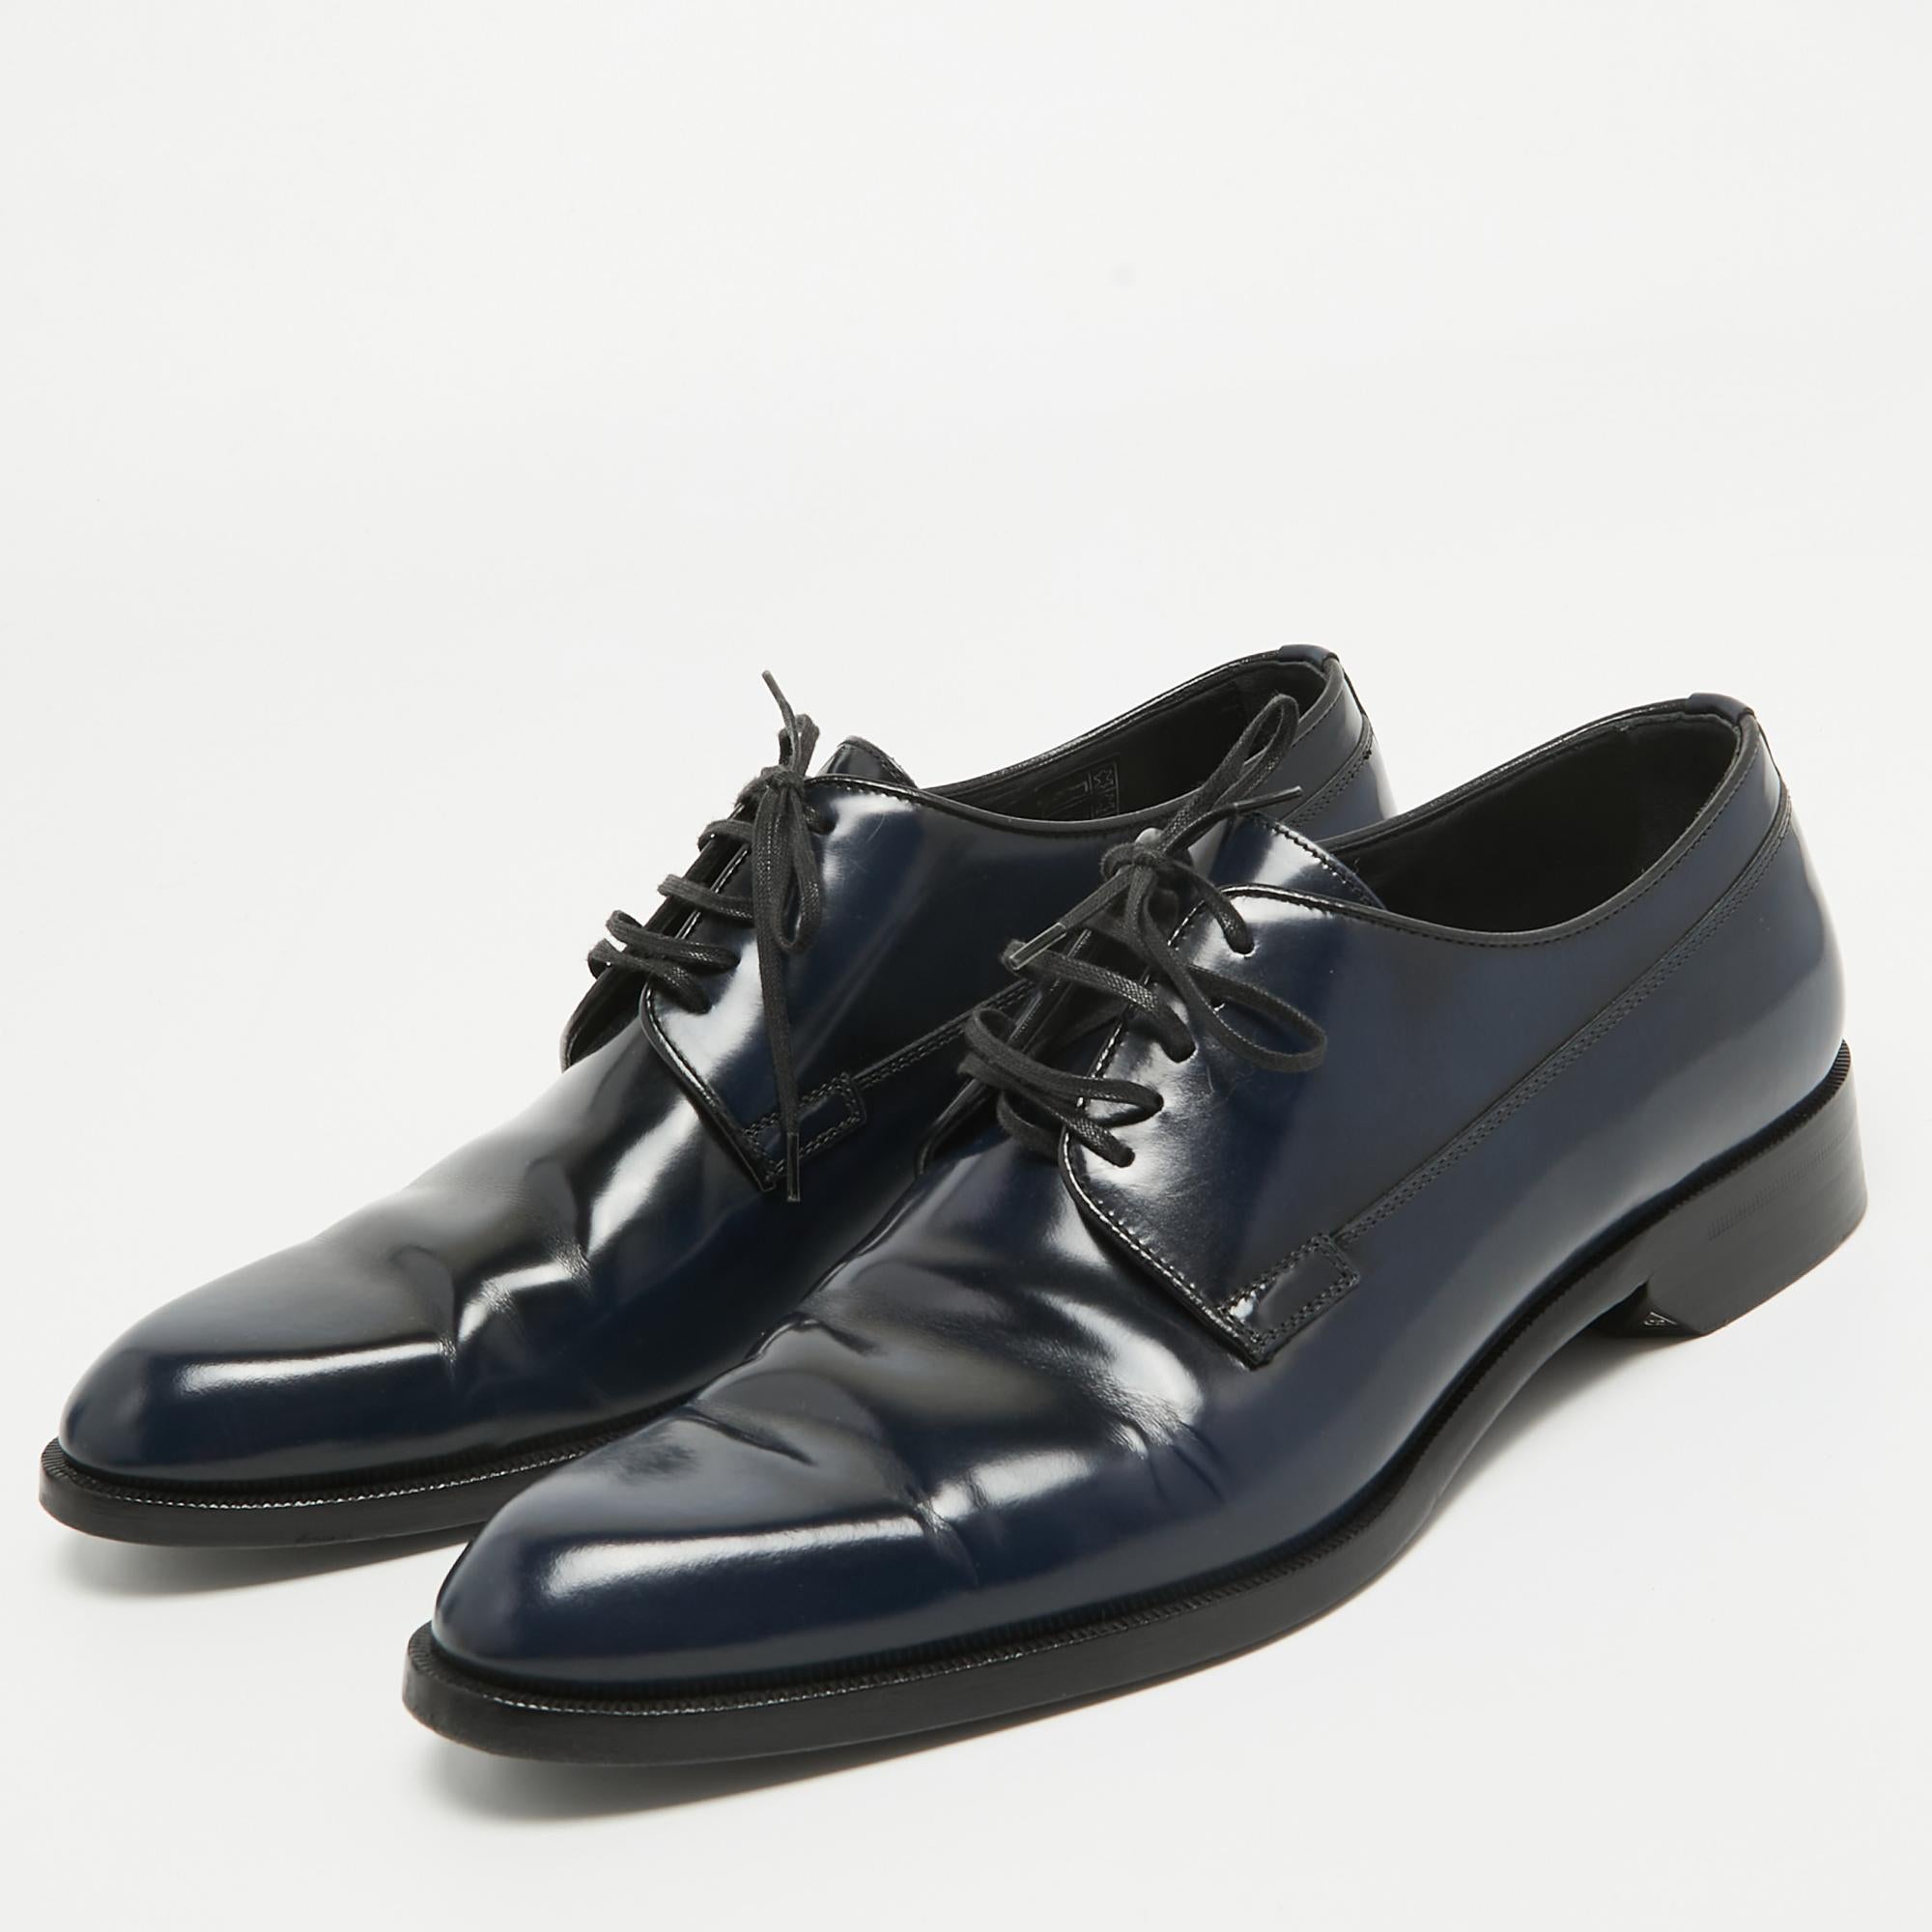 These Dior derby shoes aim to deliver a fashionable result. Constructed using patent leather and secured with laces, these shoes are as durable as they are appealing.

Includes: Original Dustbag